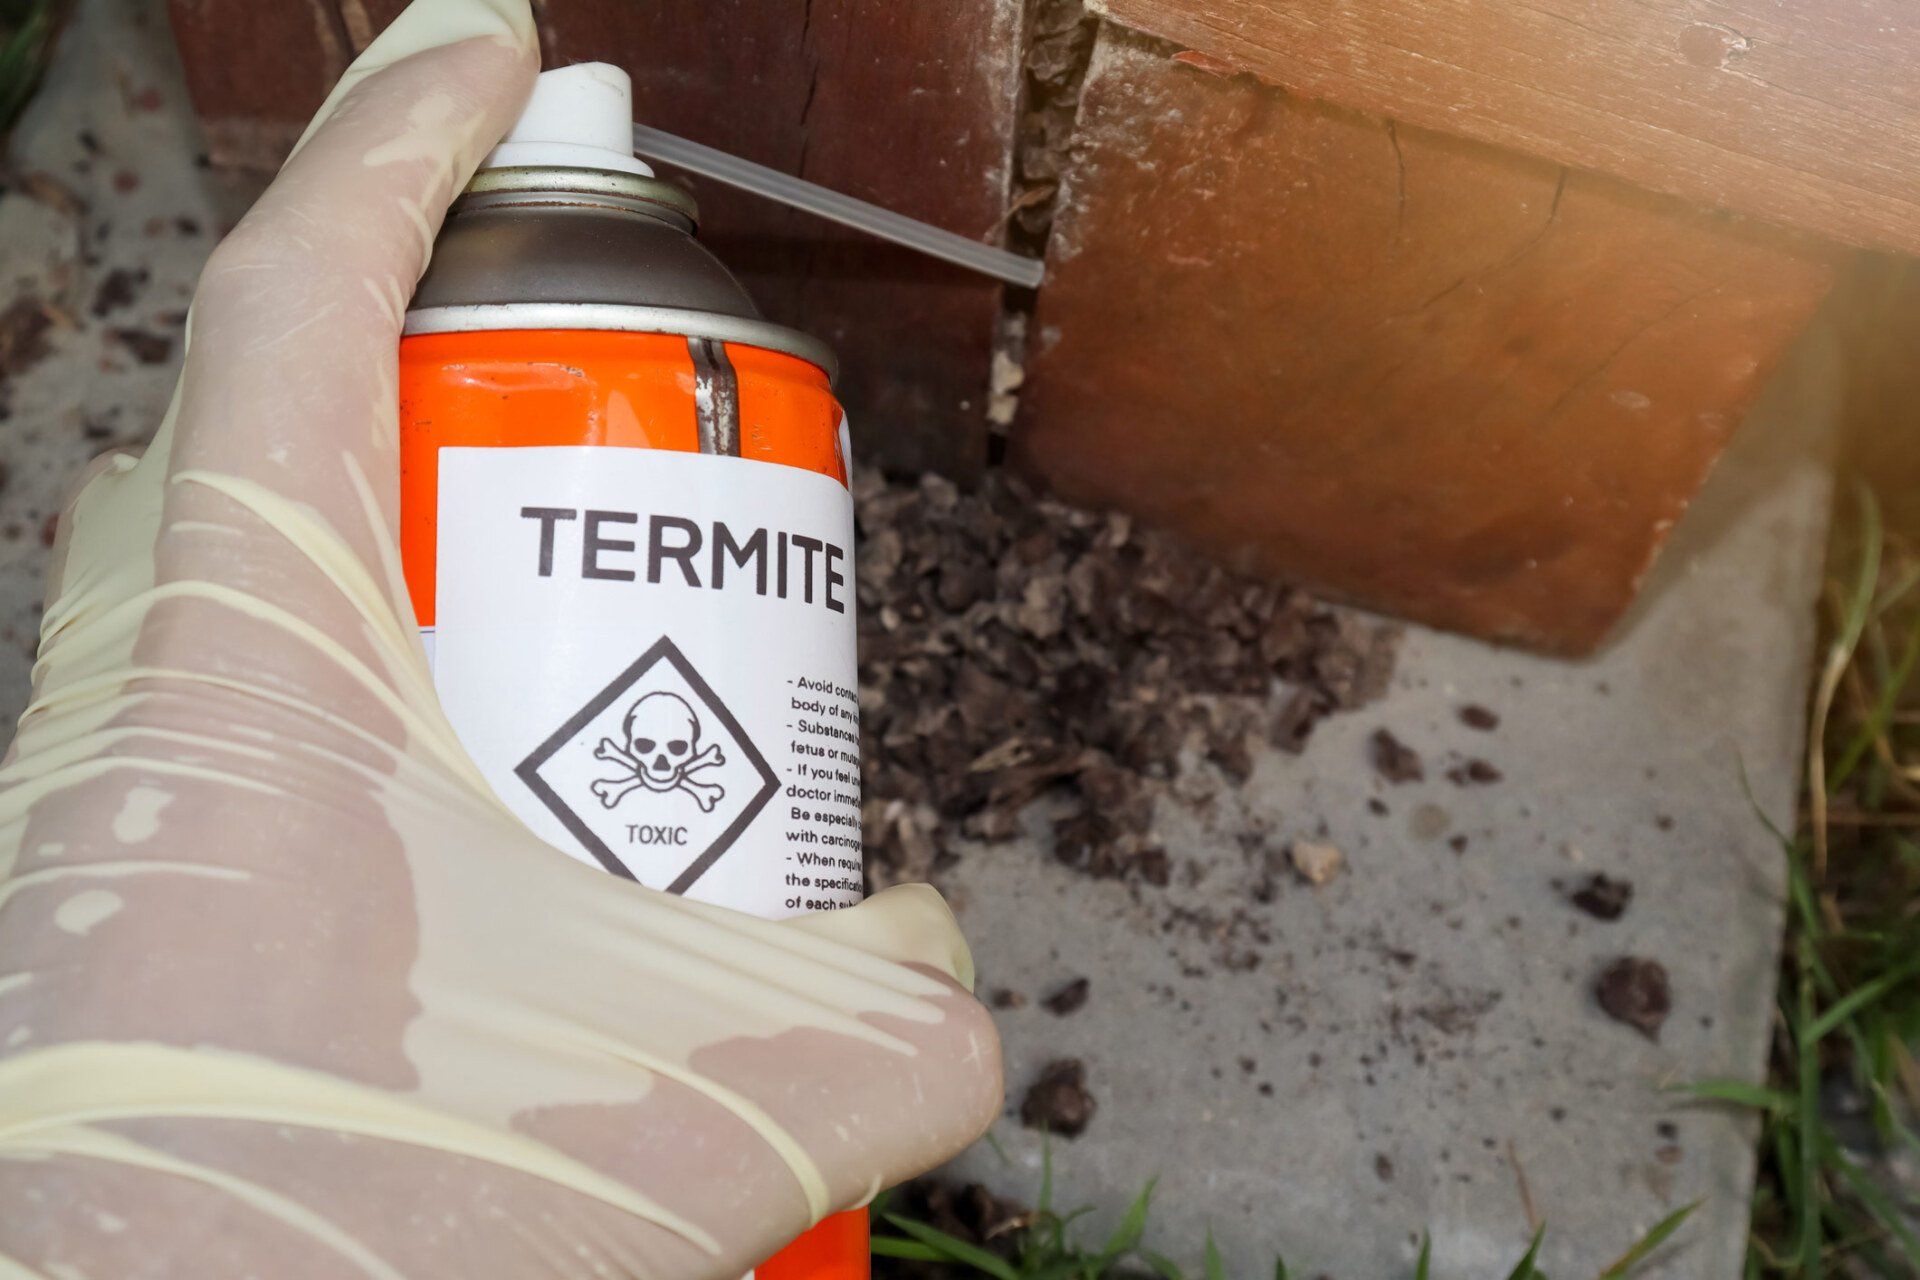 Spray Chemicals To Kill Termites In The Wall Holes - Warren, MI - Maple Lane Pest Control